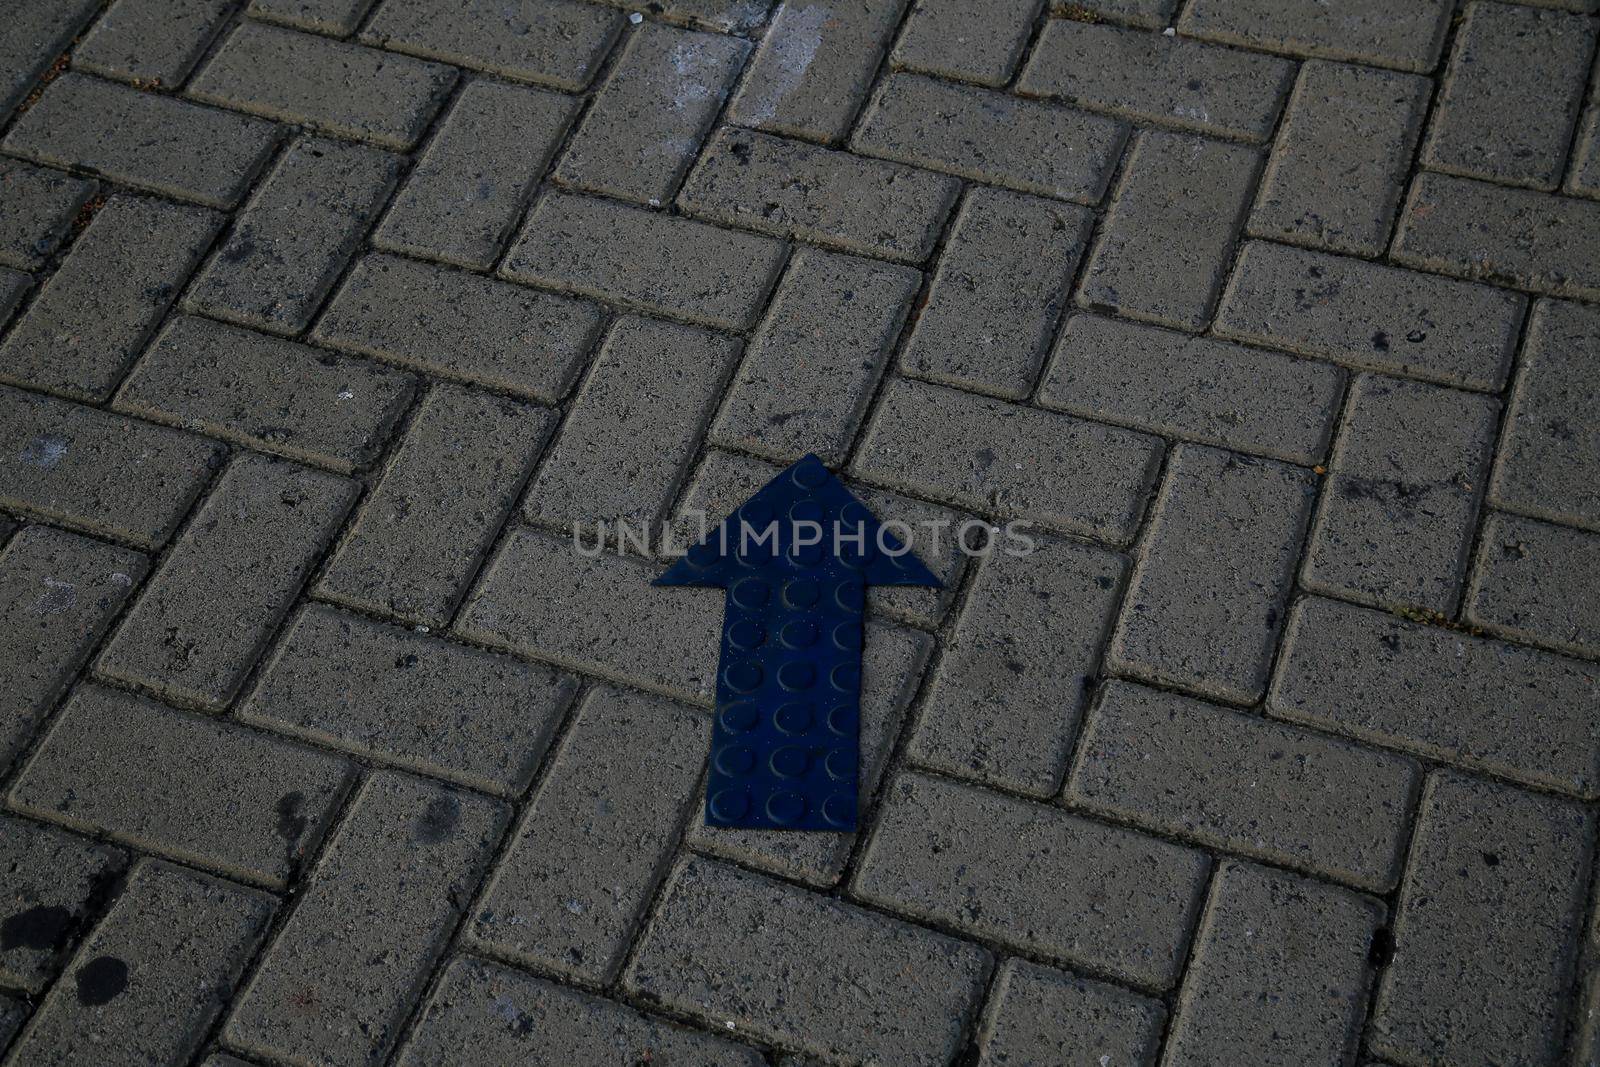 salvador, bahia, brazil - january 22, 2021: street pavement made of concrete brick in the Barra district in the city of Salvador.